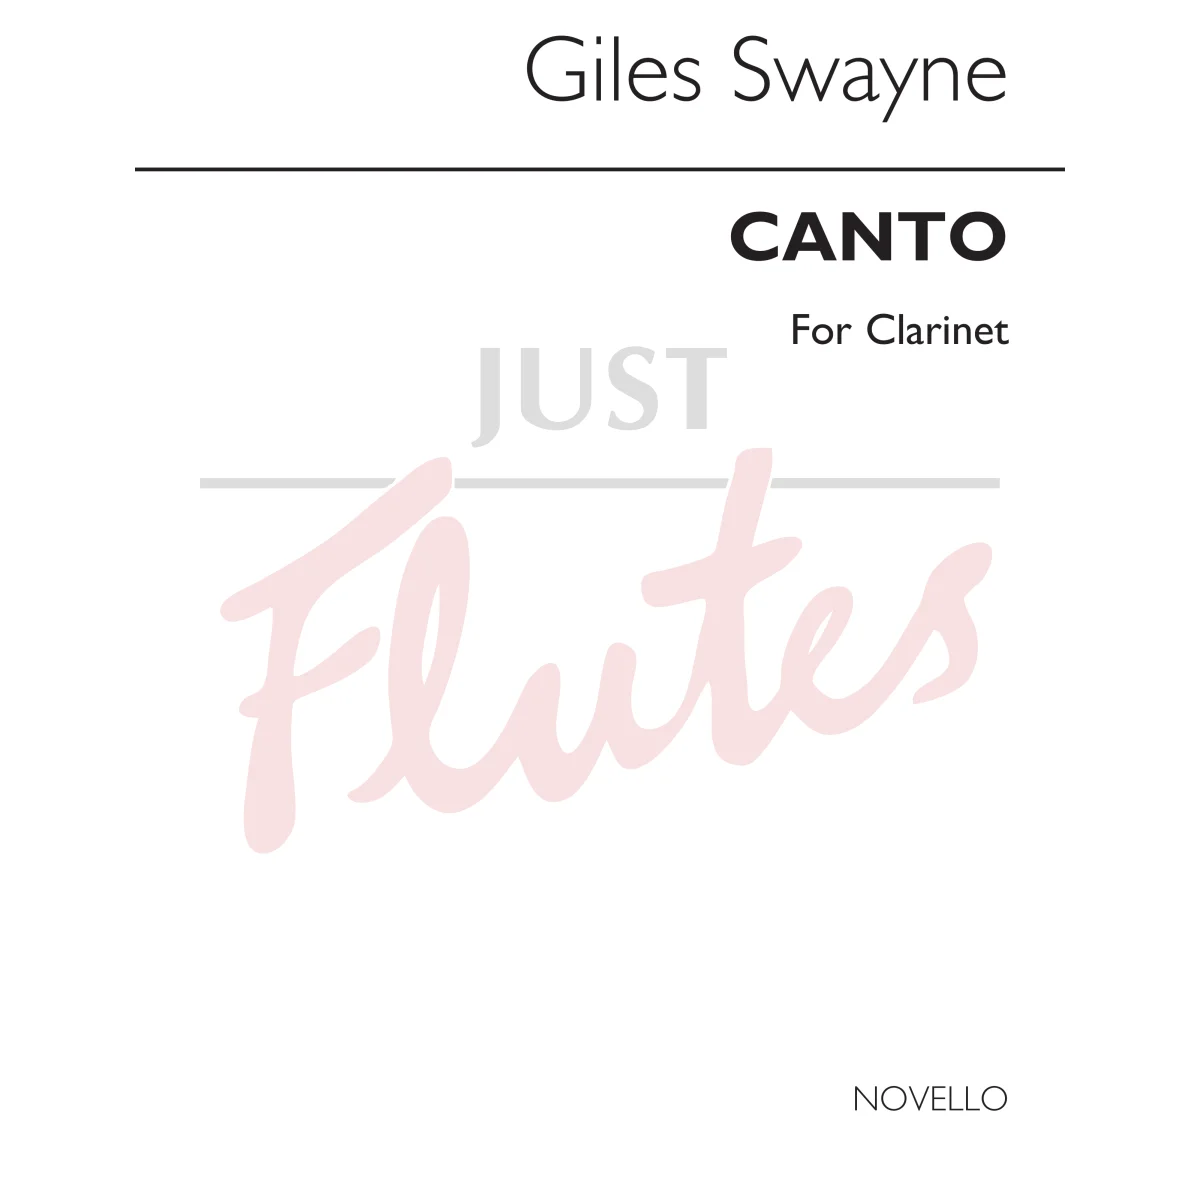 Canto for Clarinet